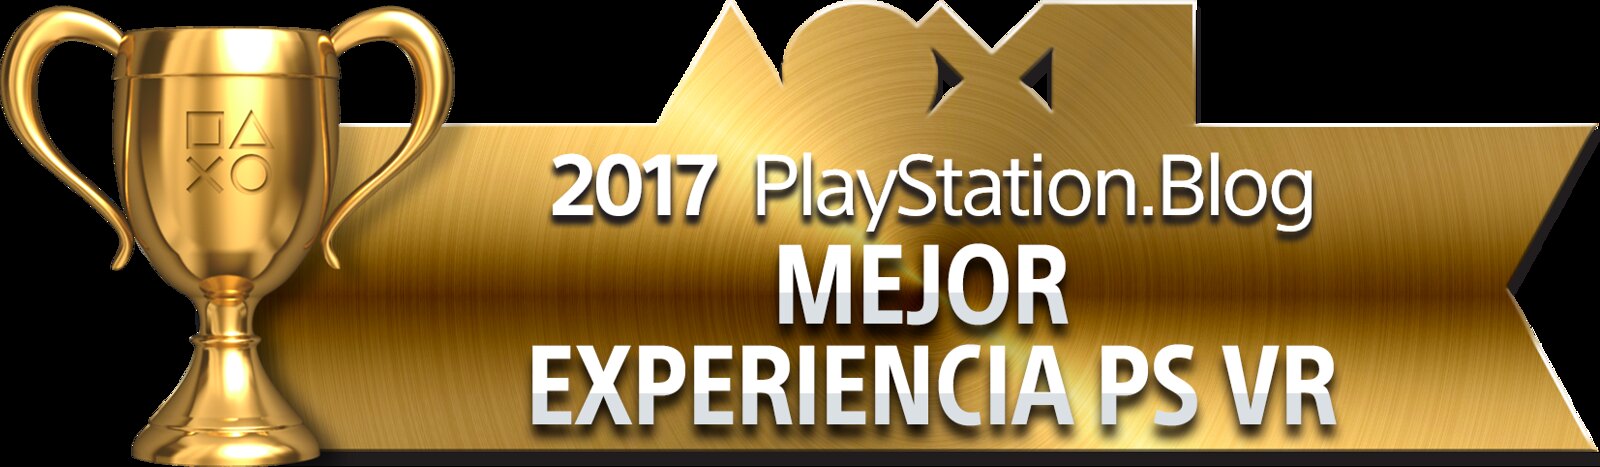 PlayStation Blog Game of the Year 2017 - Best PS VR Experience (Gold)